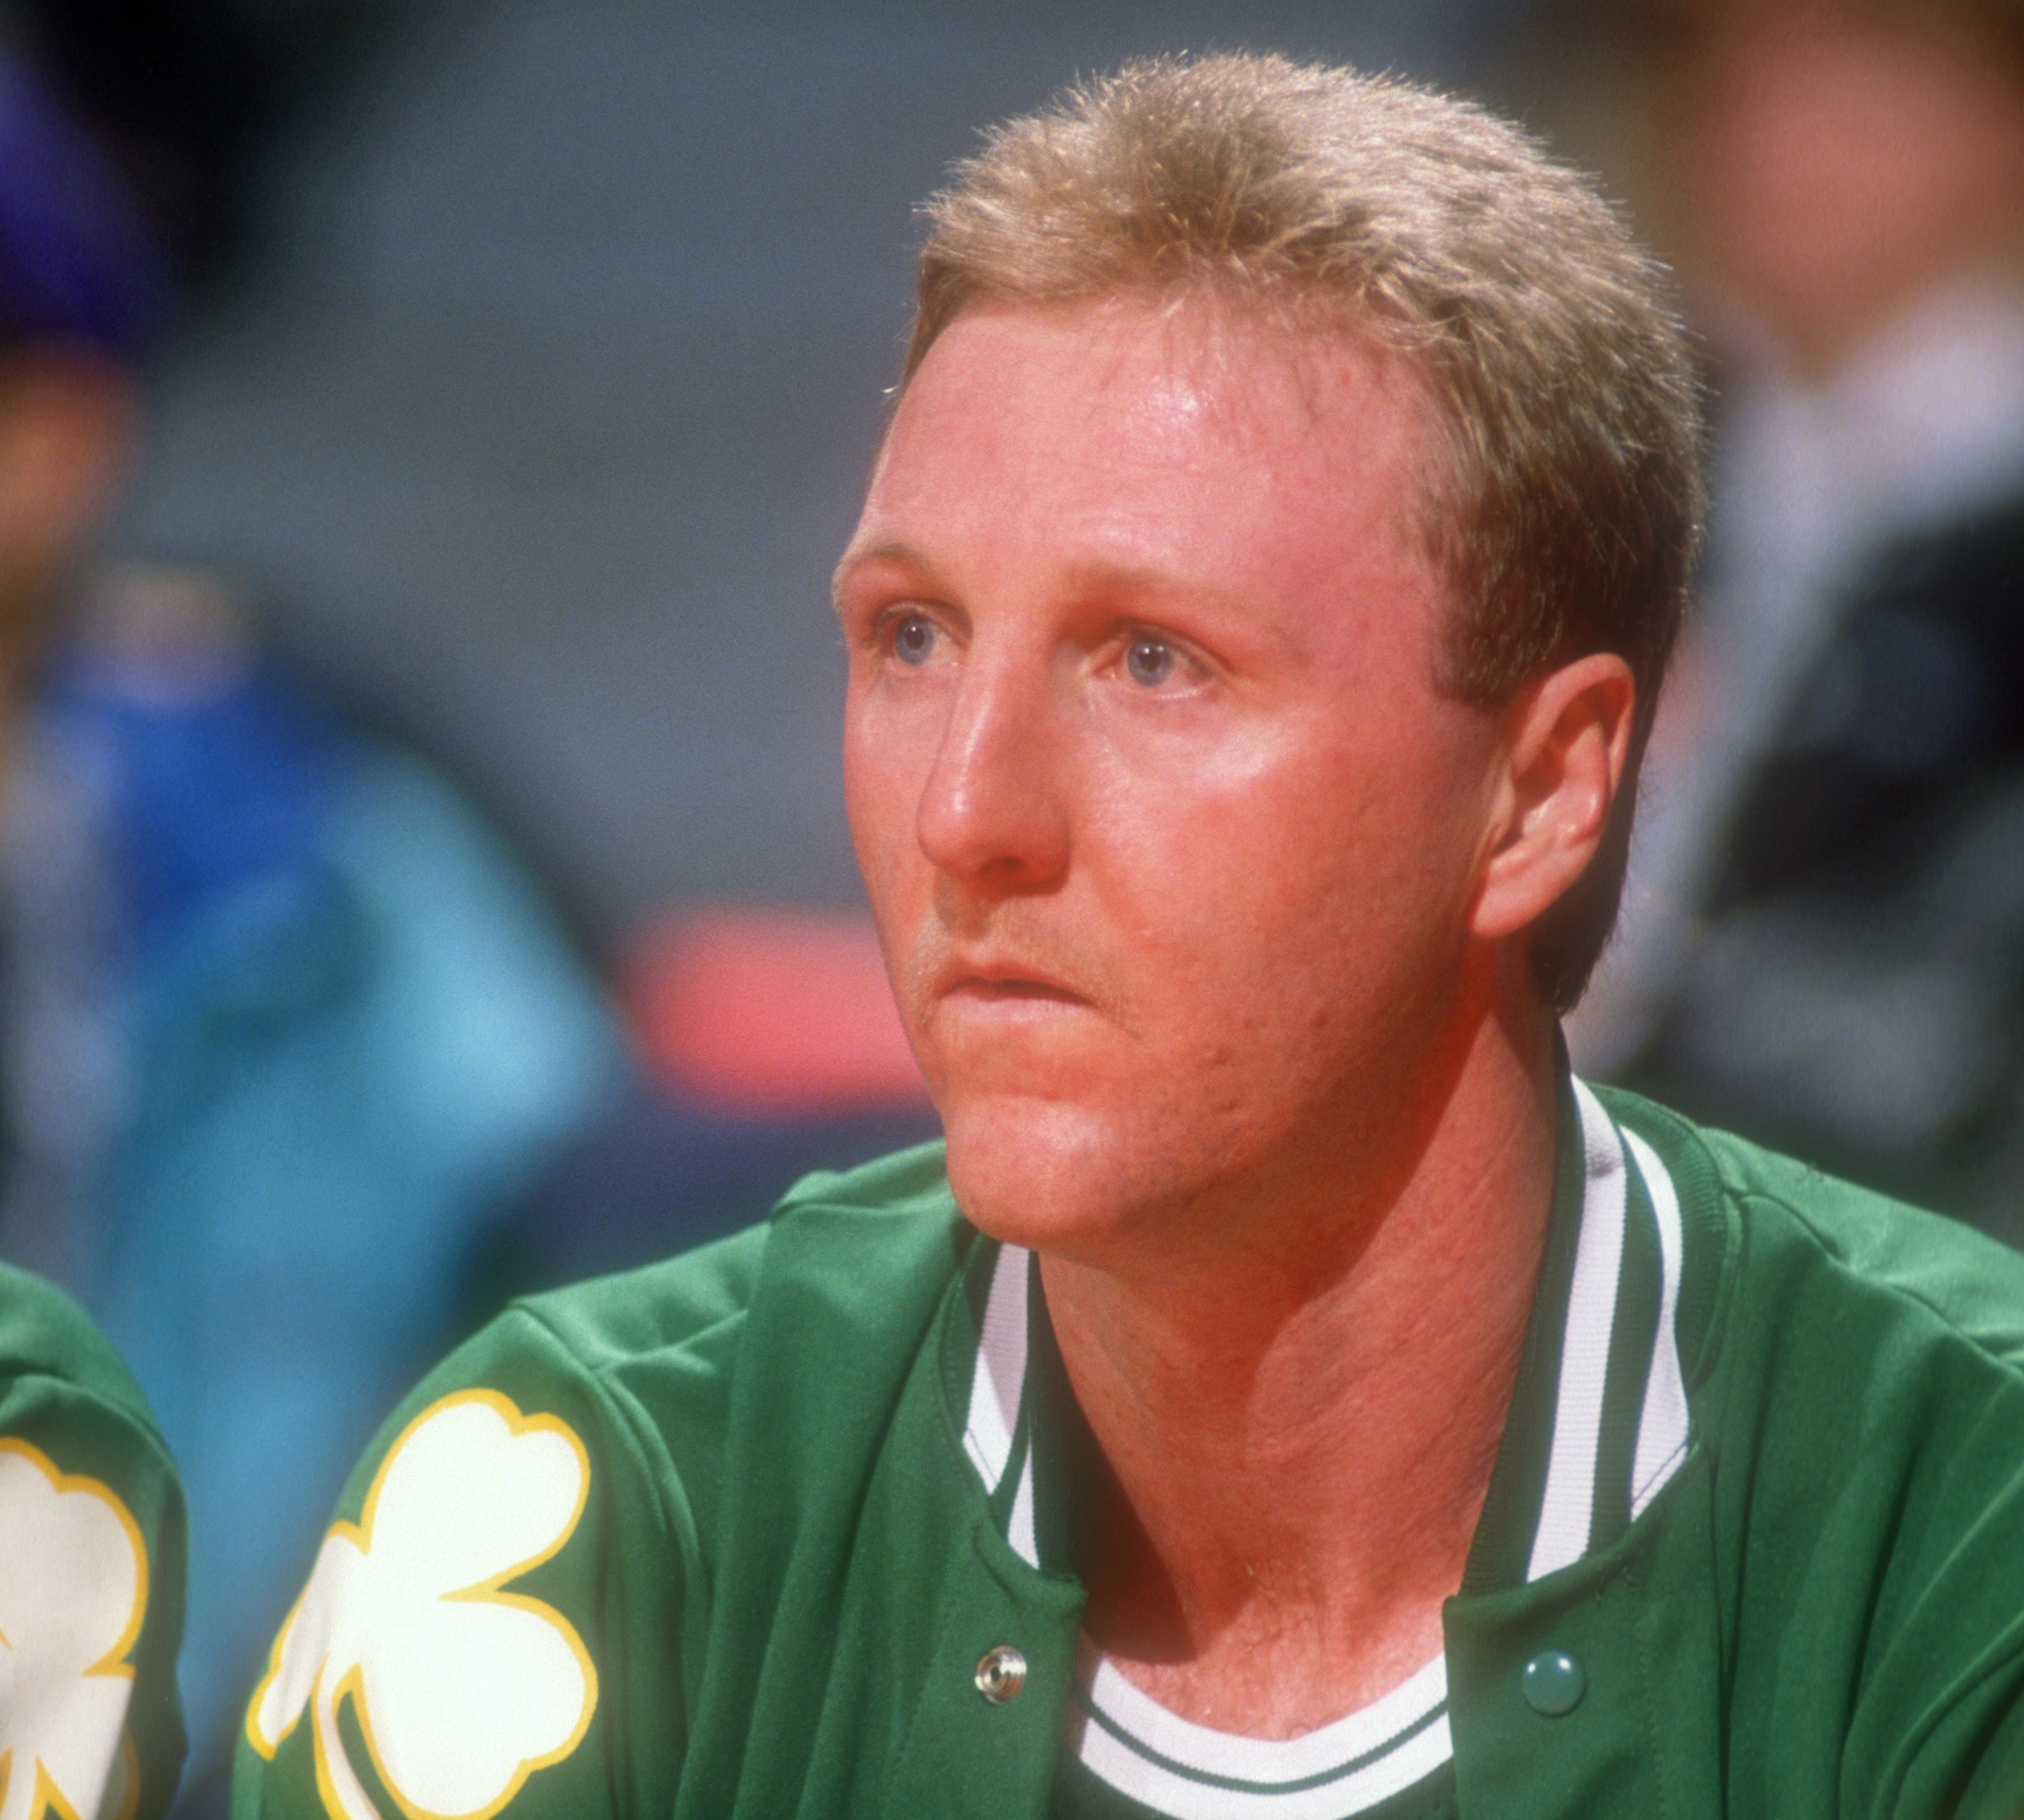 Larry Bird of the Boston Celtics looks on during a NBA game against the Washington Bullets.